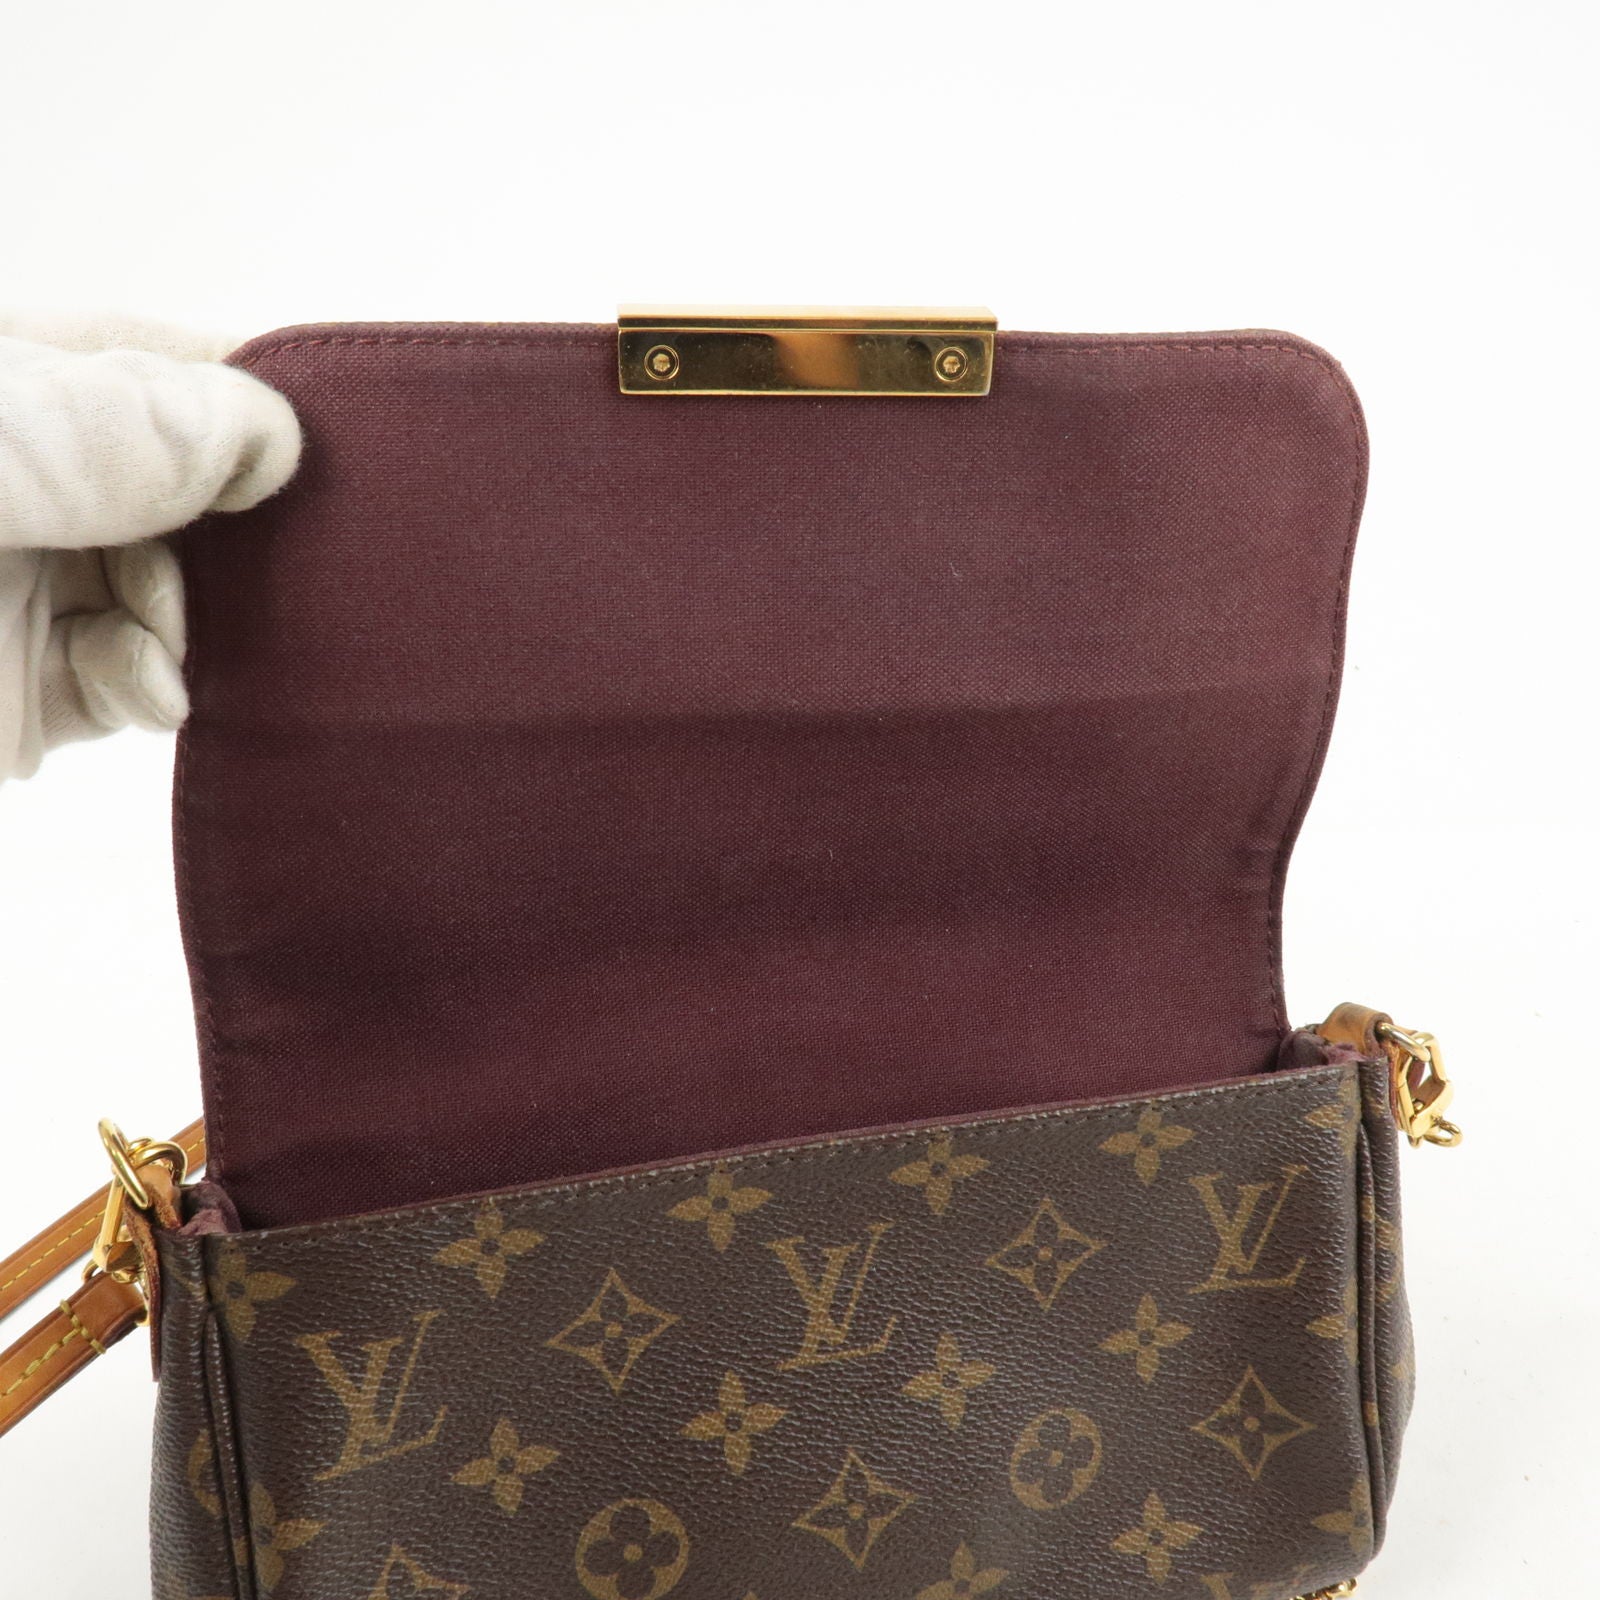 WHAT FITS INSIDE THE LOUIS VUITTON FAVORITE PM!?